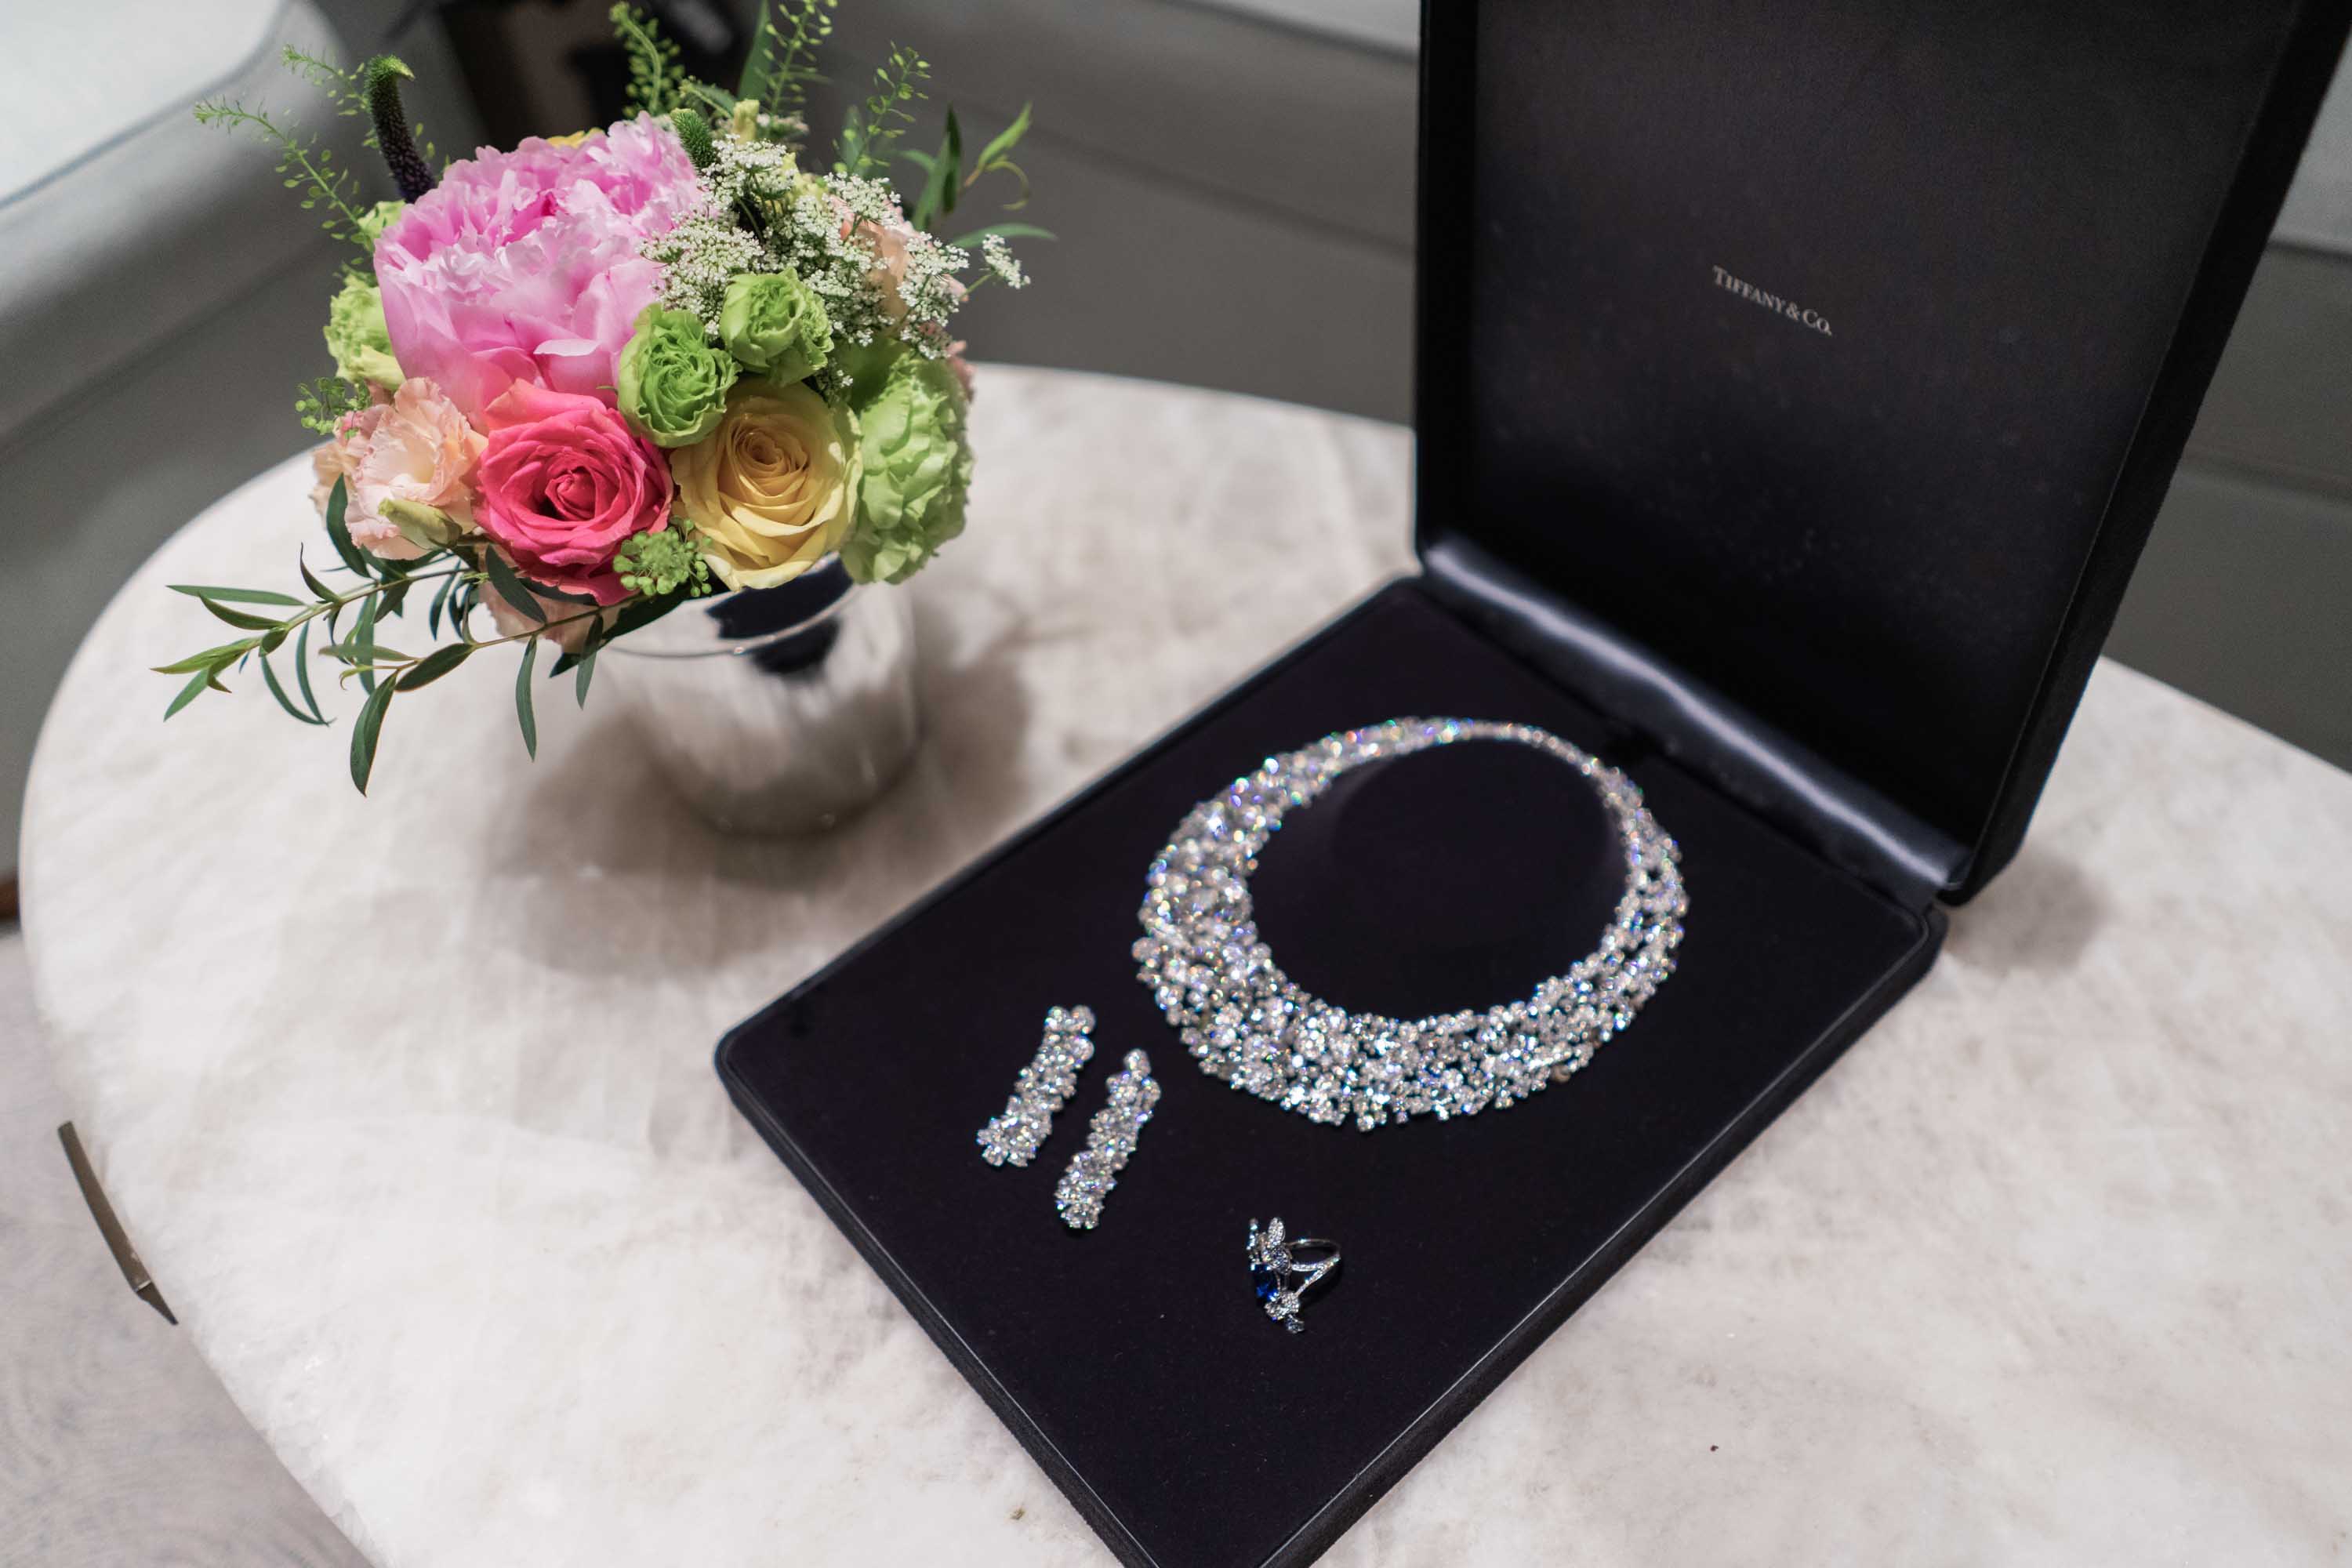 A glimpse into the private dinner for L'armoire and Tiffany & Co